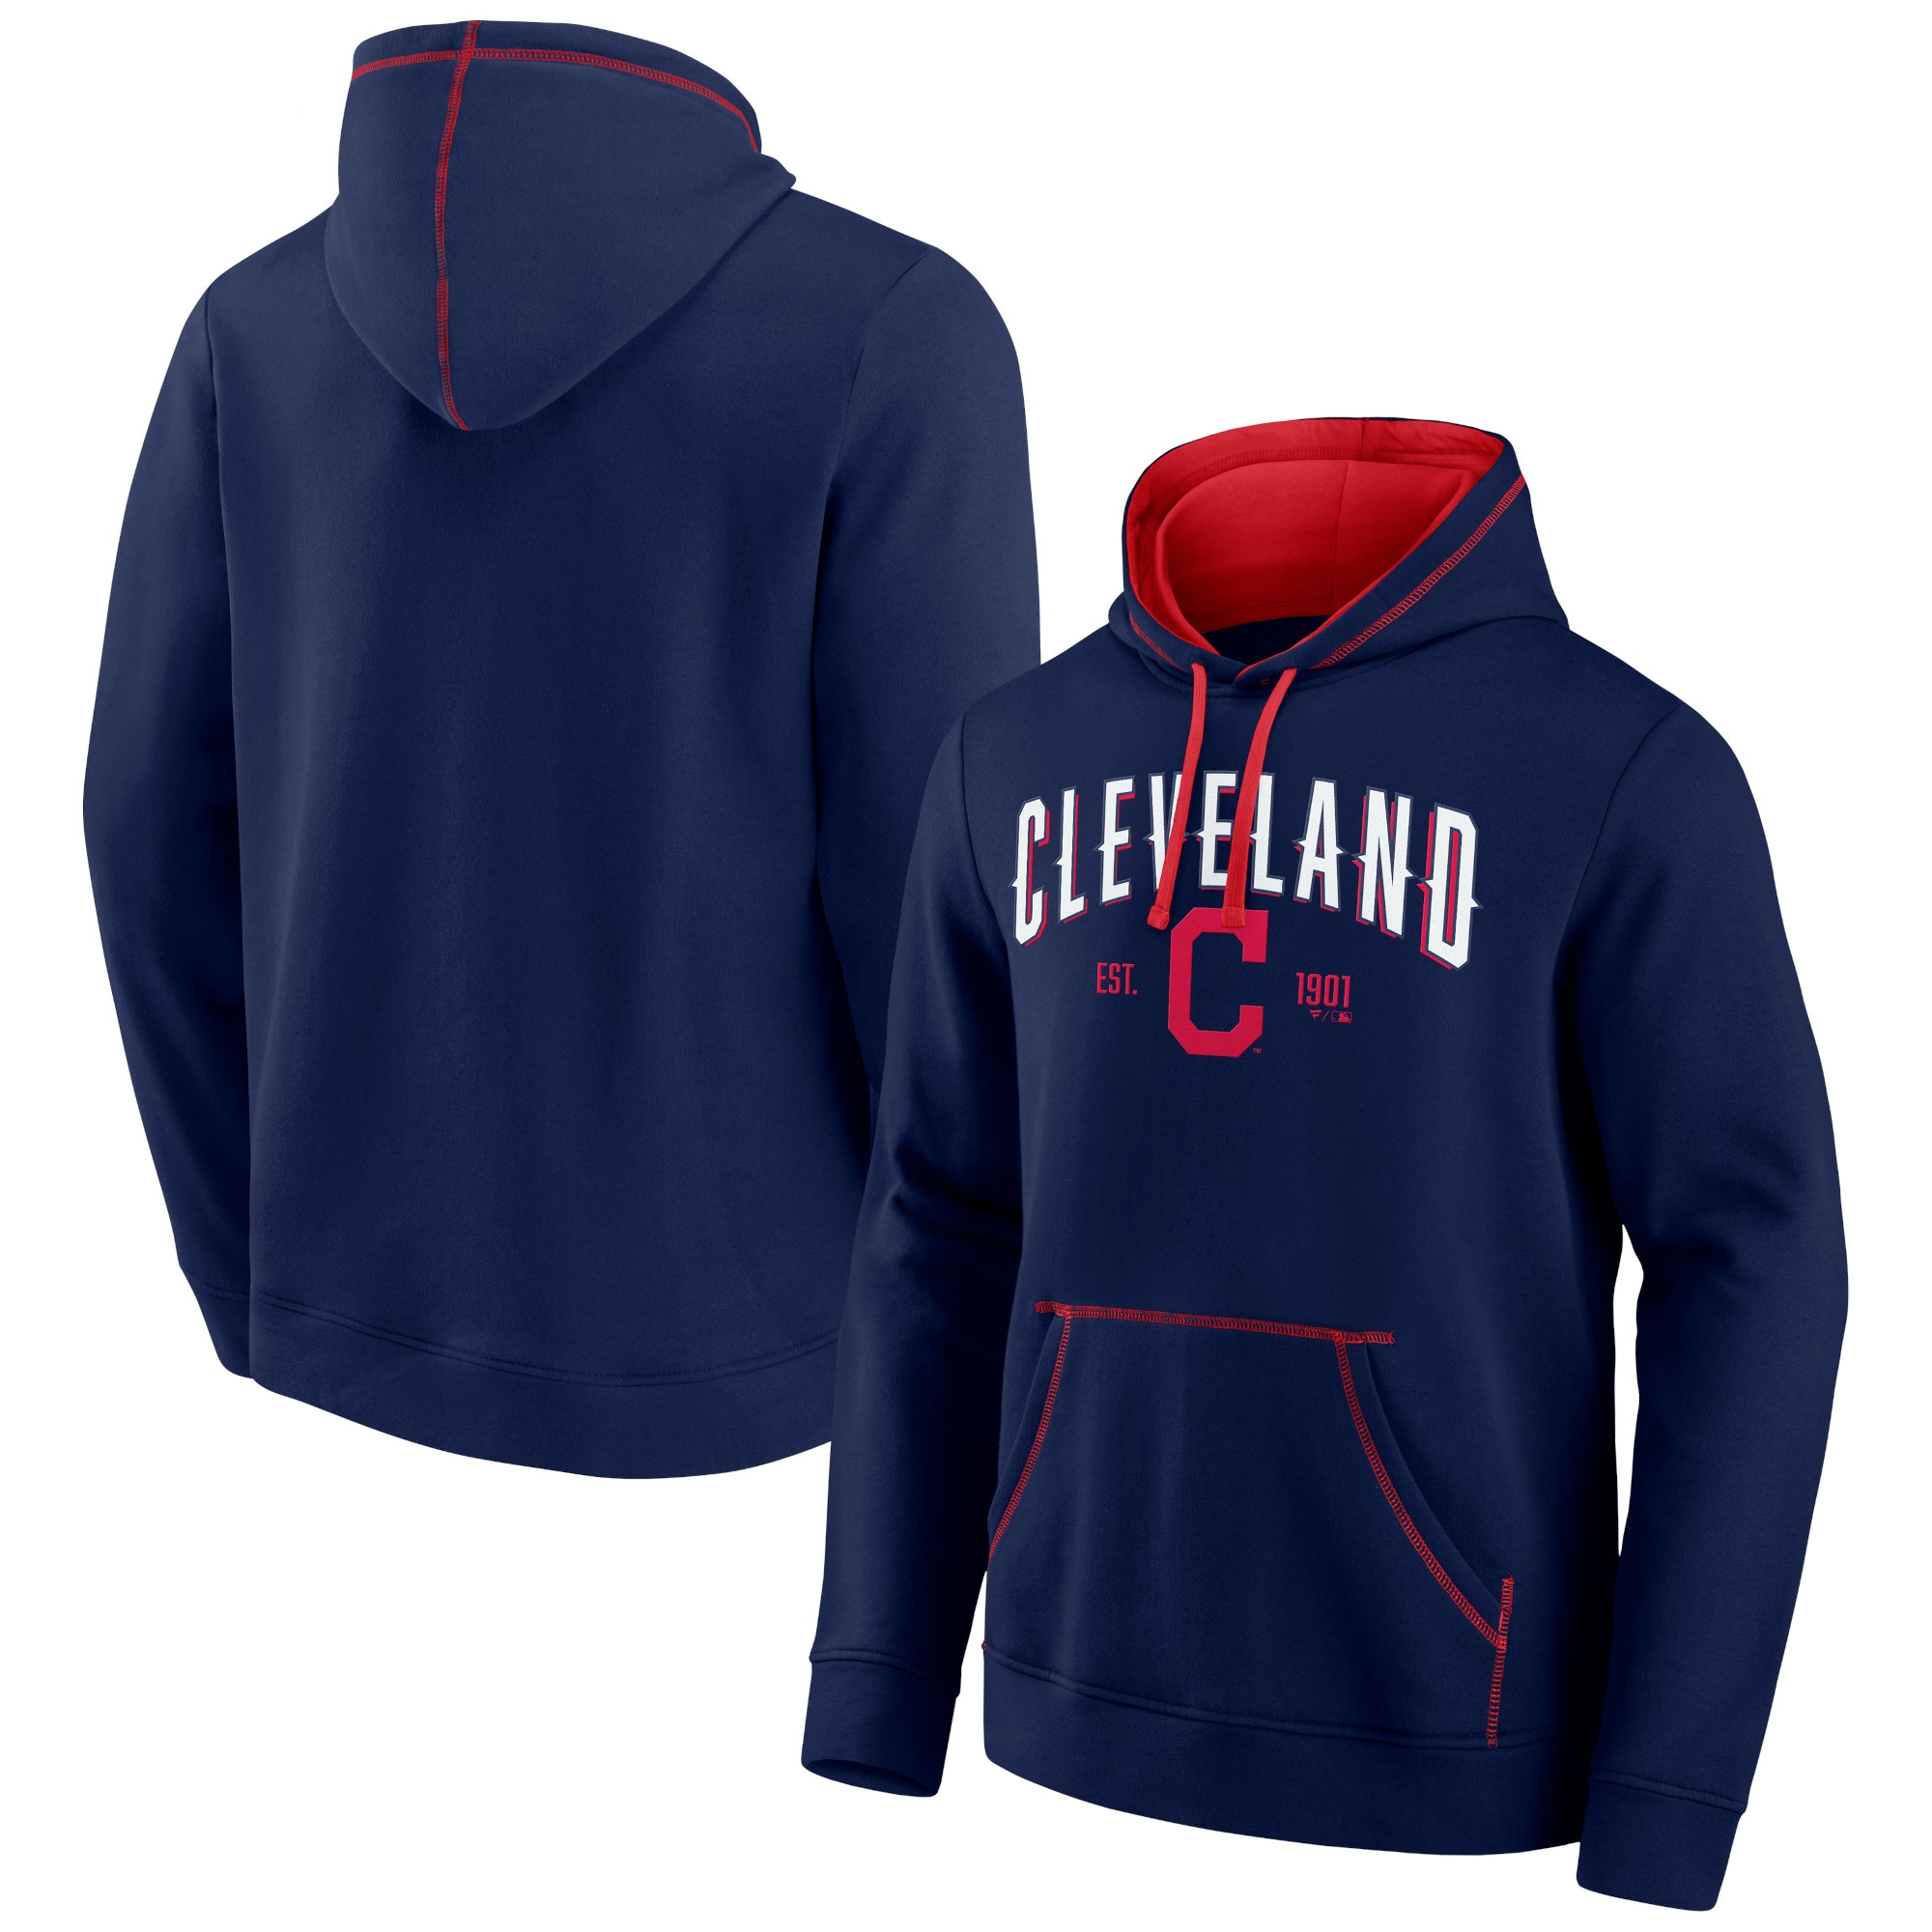 Cleveland indians mlb baseball vintage shirt hoodie sweater long sleeve  and tank top